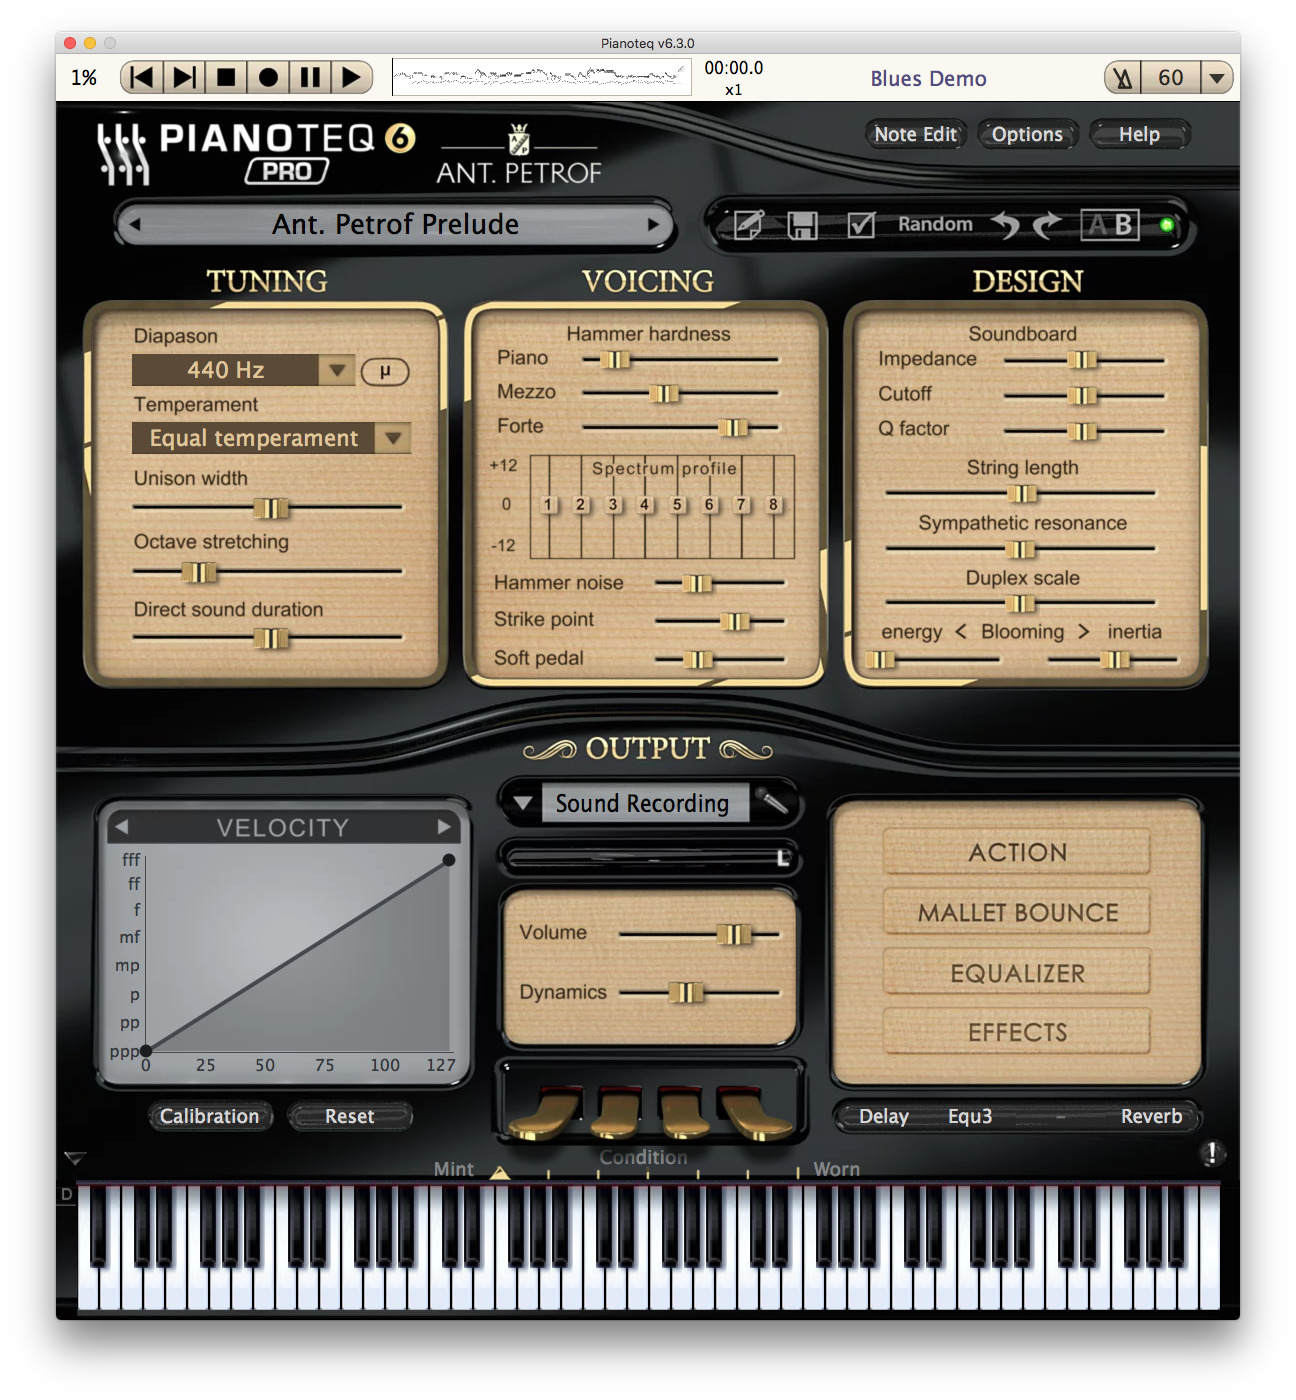 Ant. Petrof 275 grand piano add-on for pianoteq